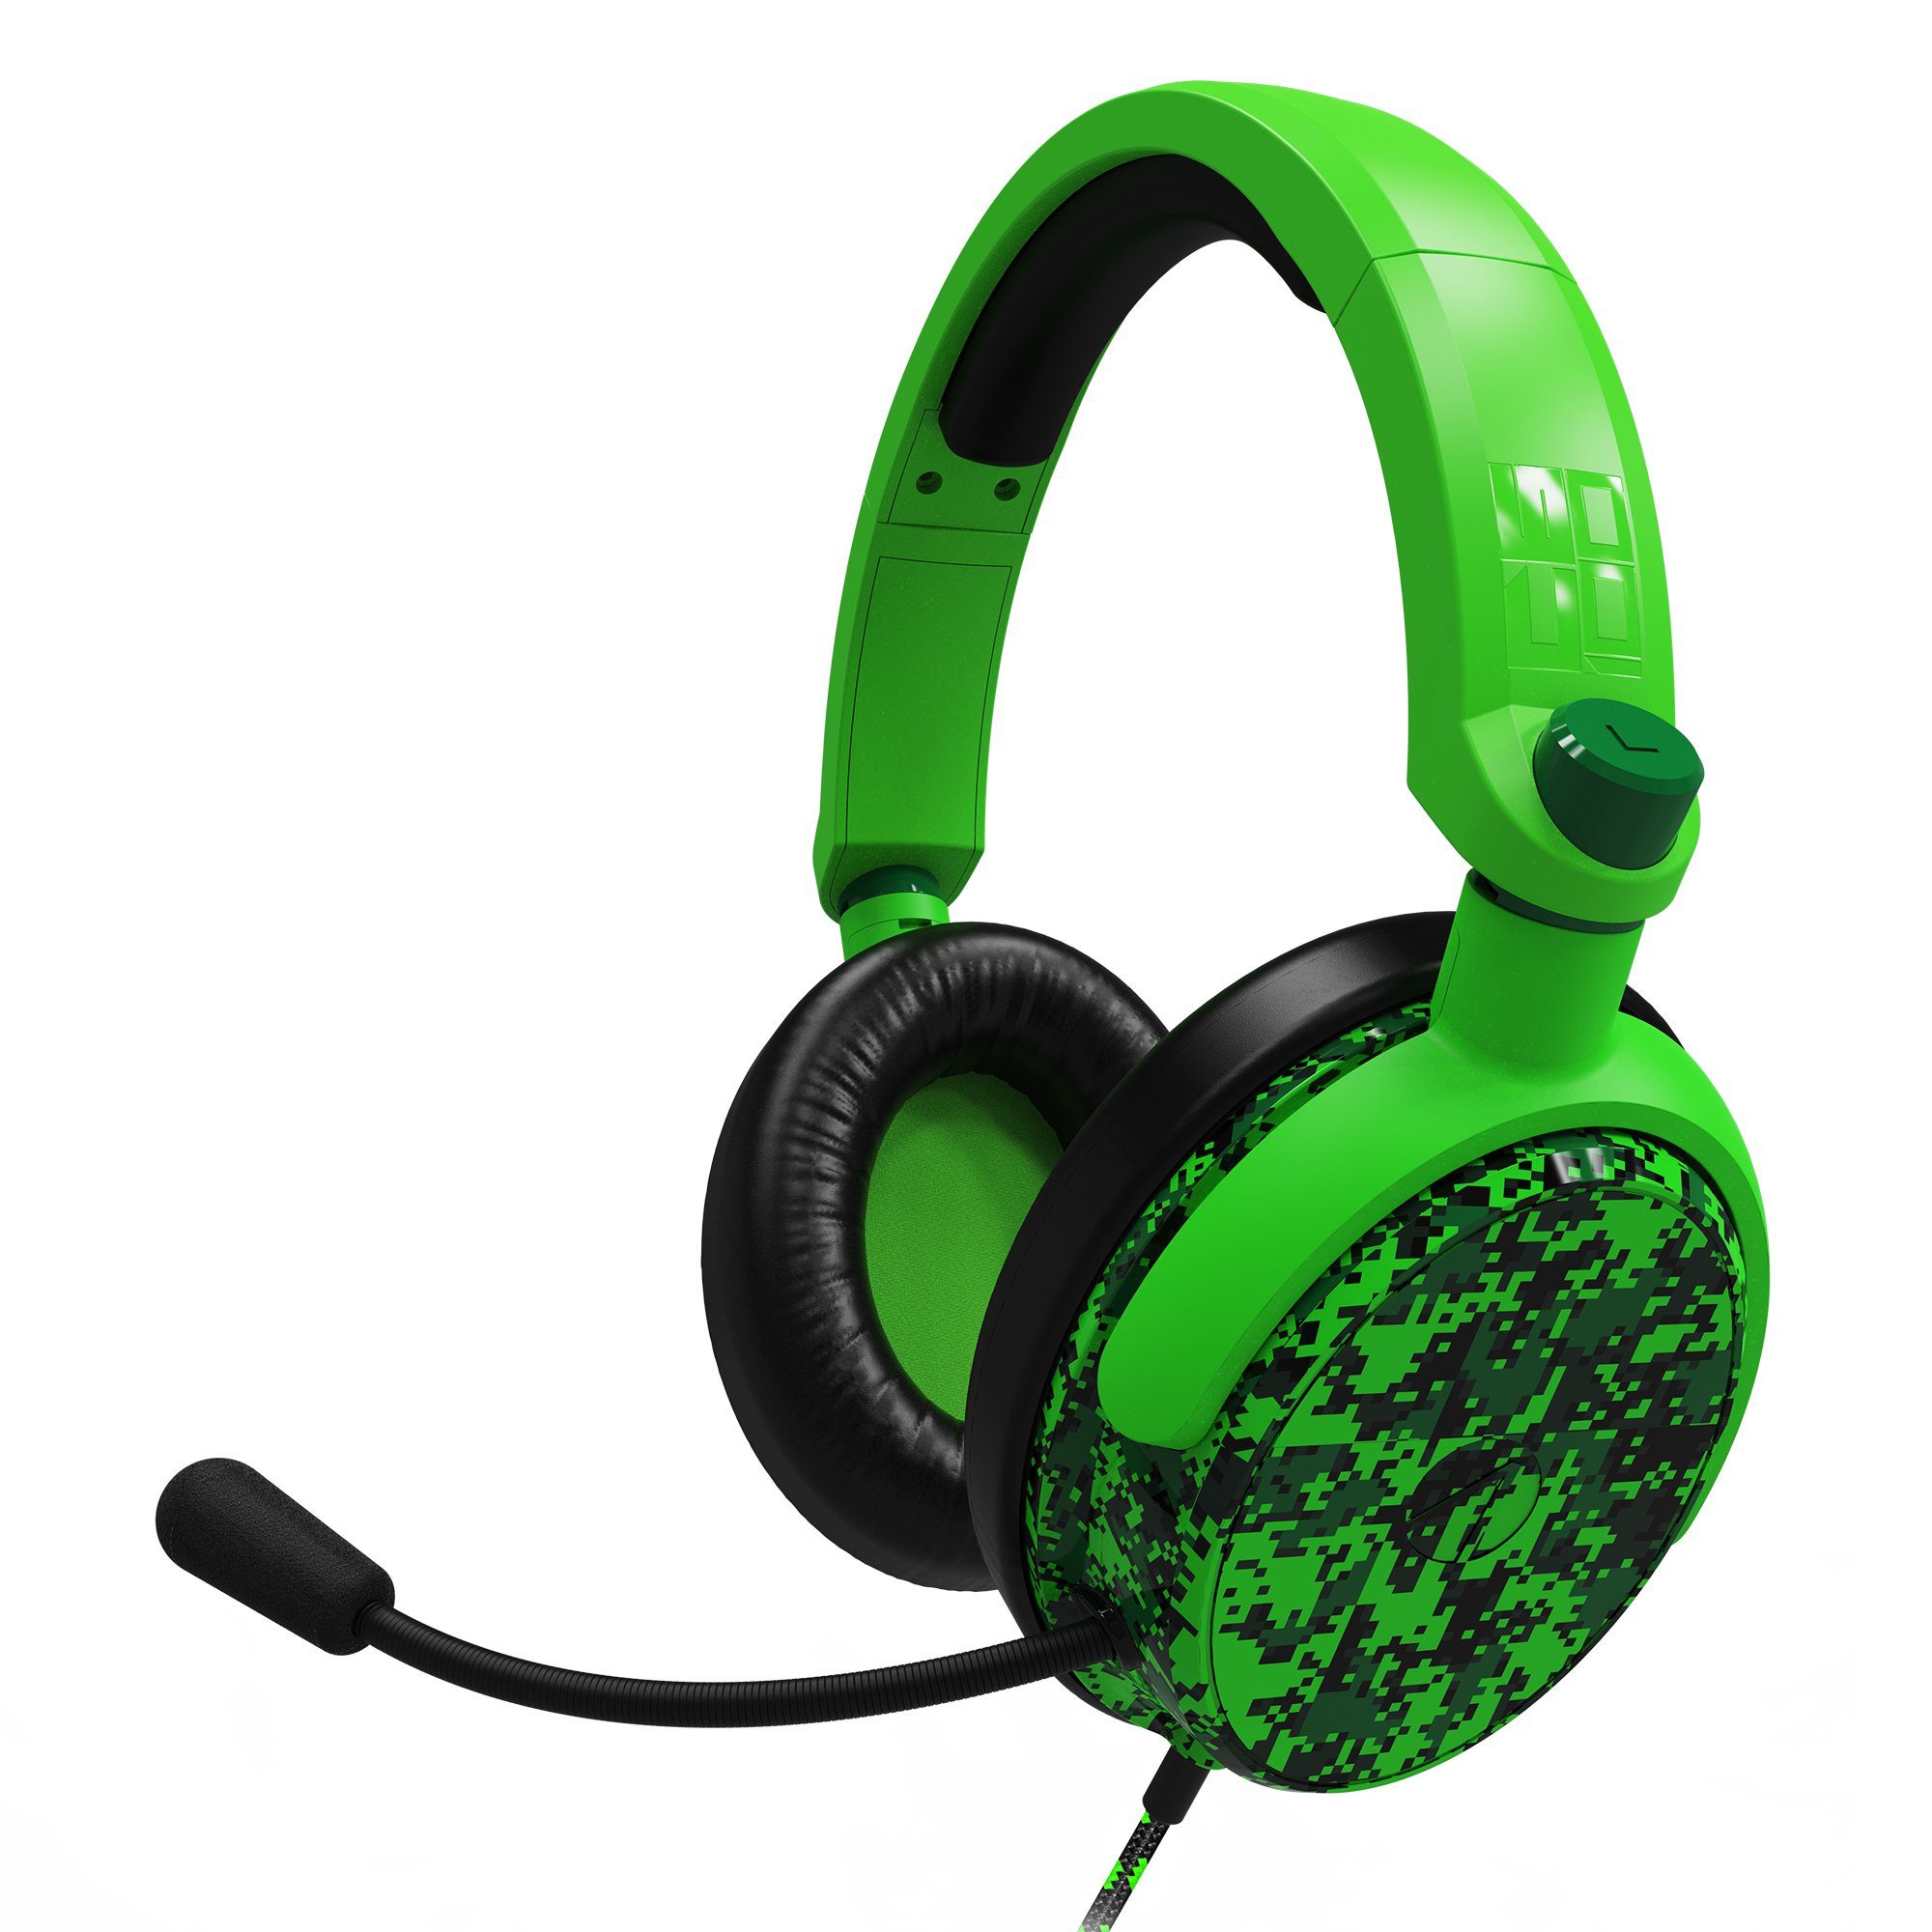 Stealth Gaming grün C6-100 Gaming-Headset Multiformat Headset camouflage Camo